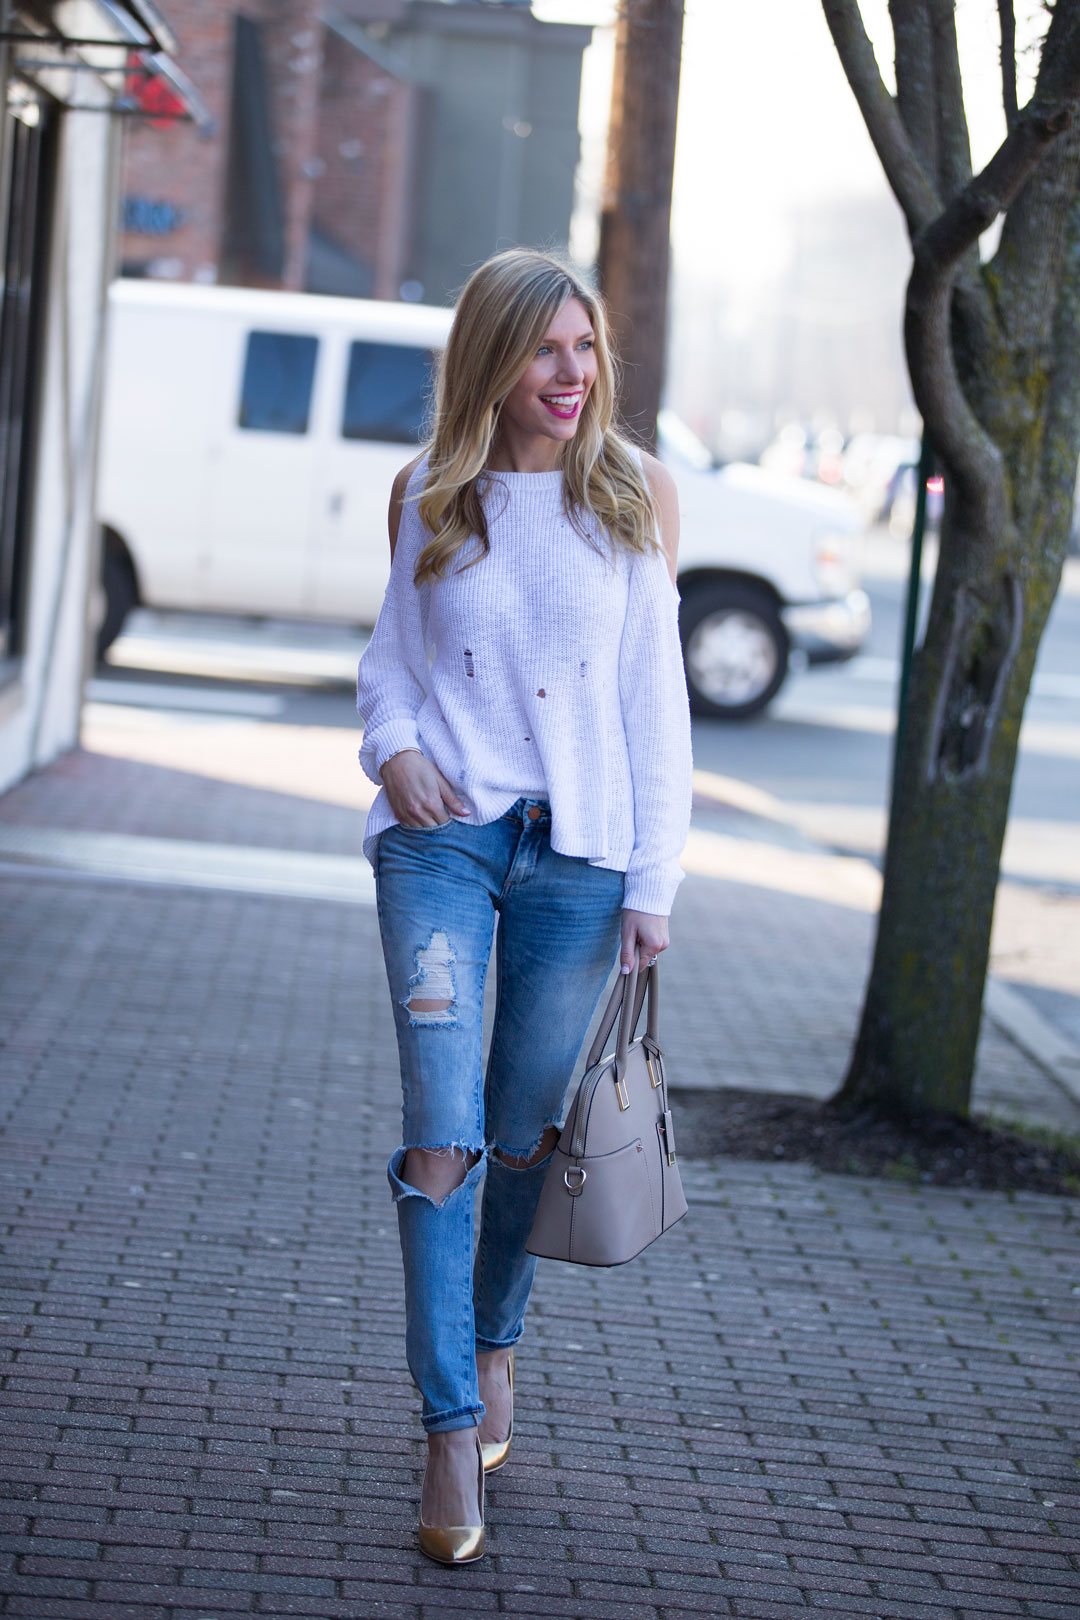 Casual Cold Shoulder Top and Ripped Jeans - The Glamorous Gal ...